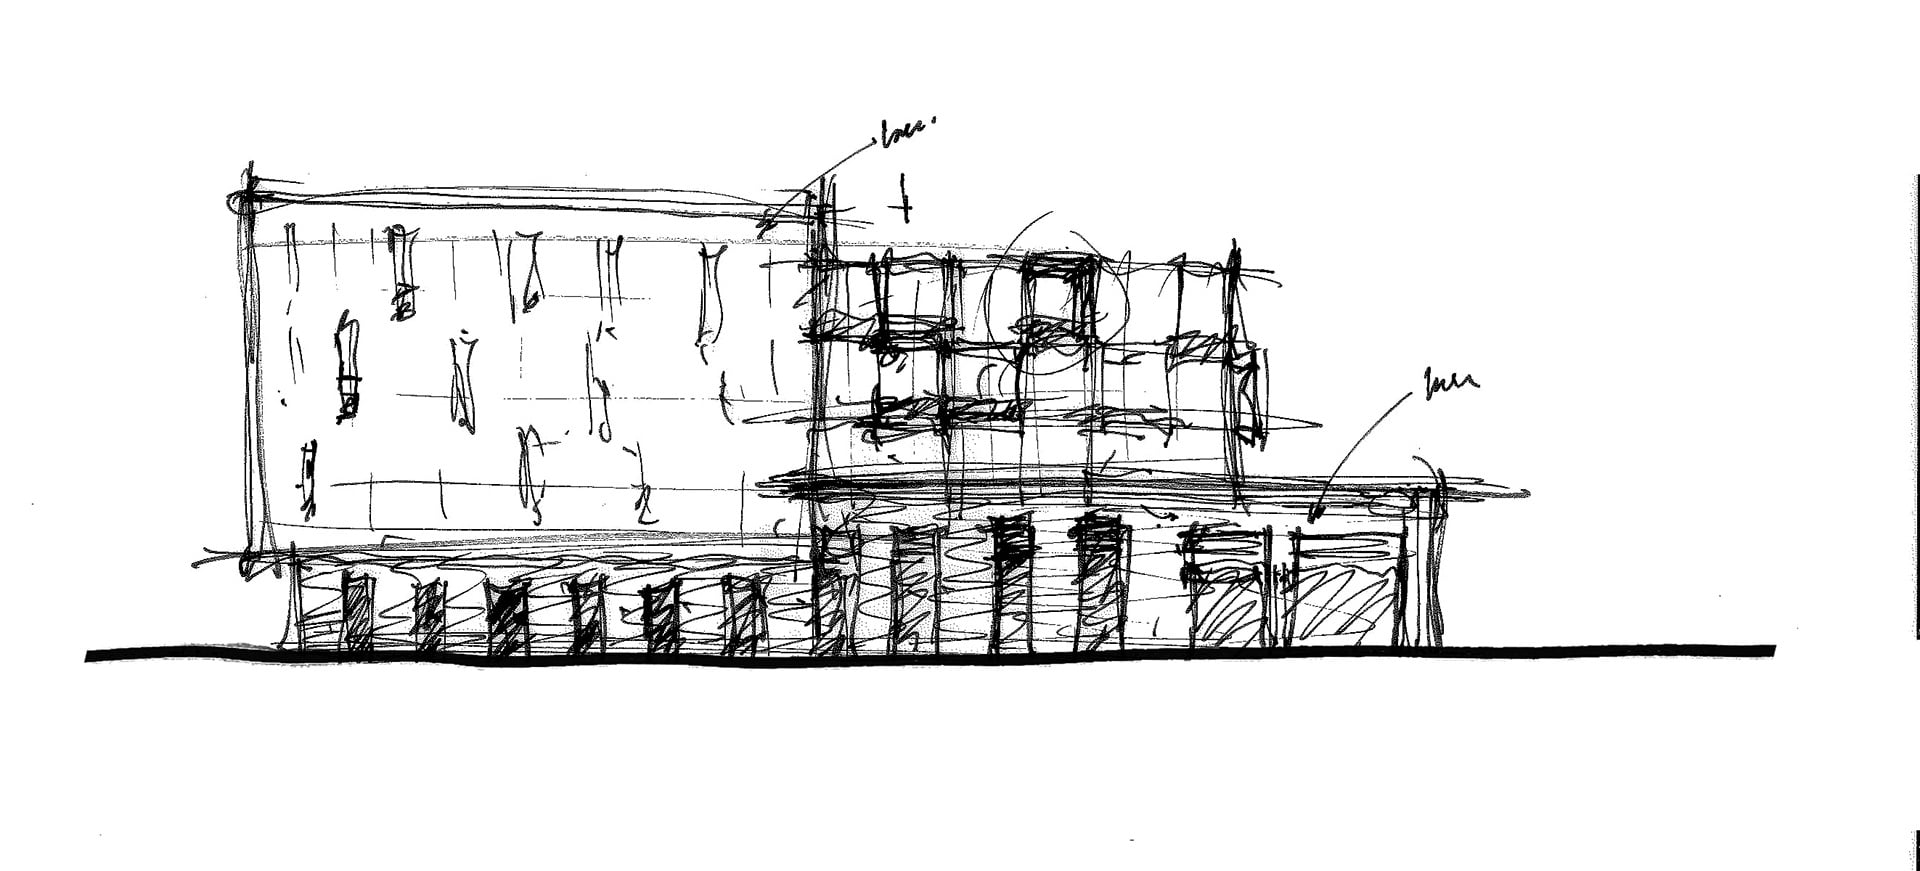 manchester sketch by trivers architectural firm in st. louis